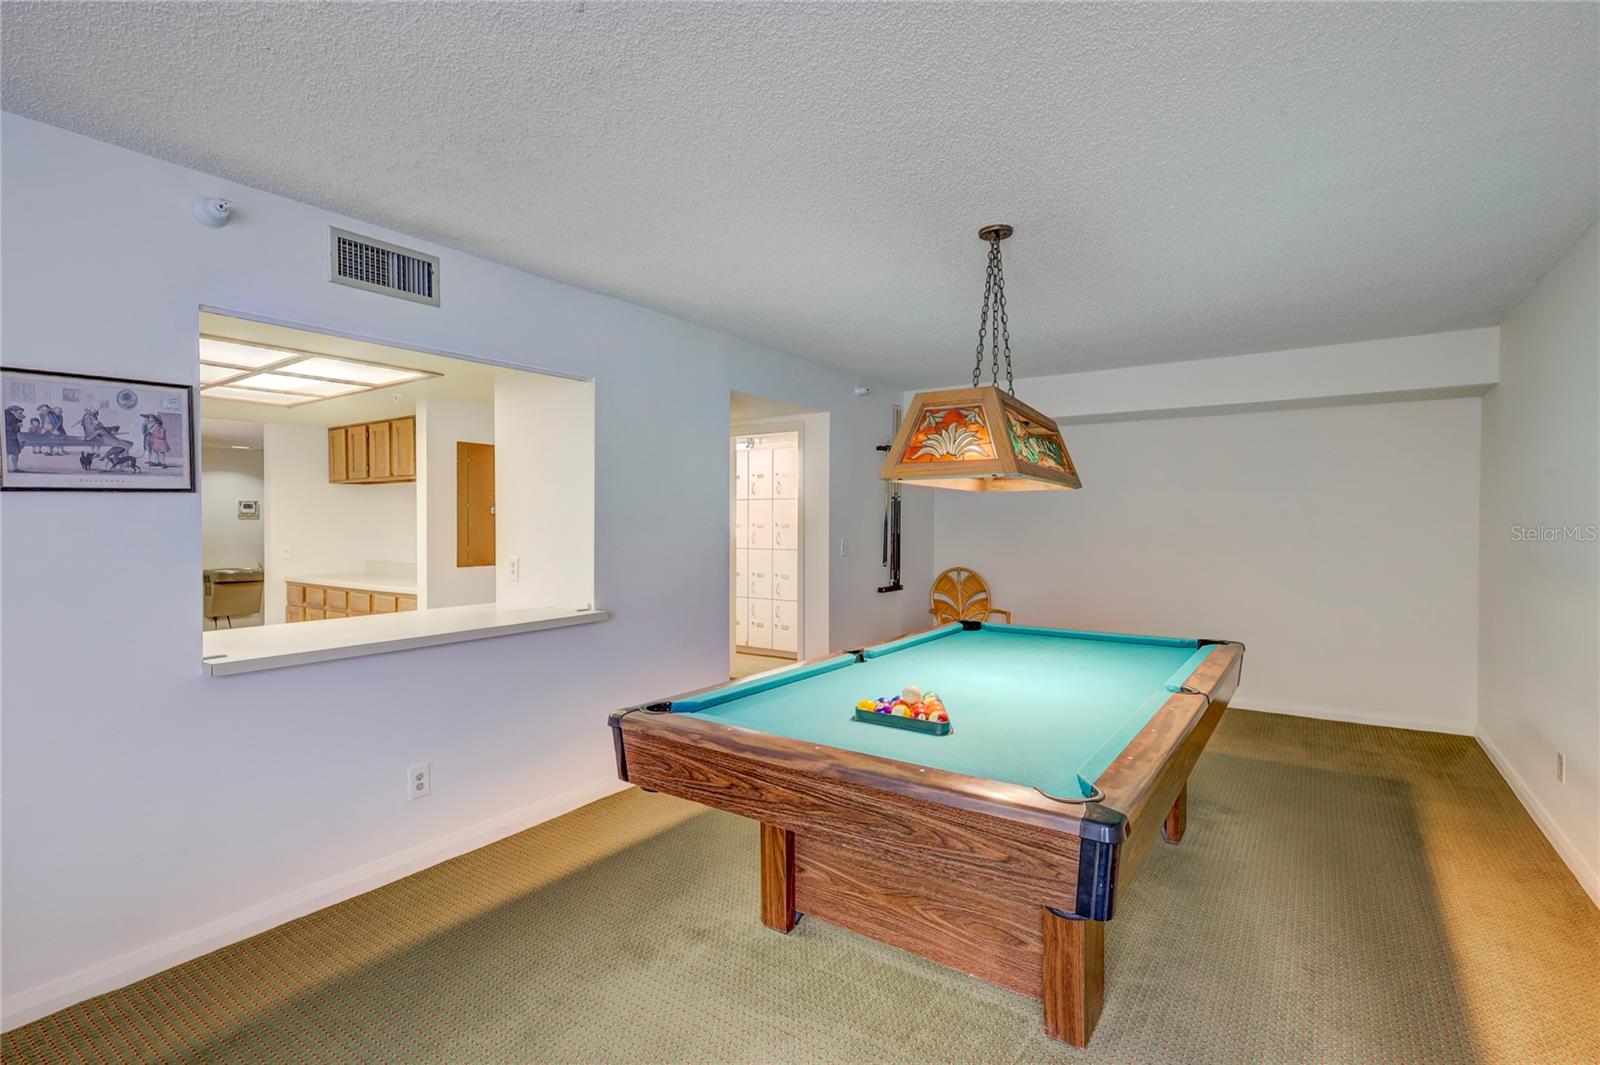 Pool table by community party kitchen